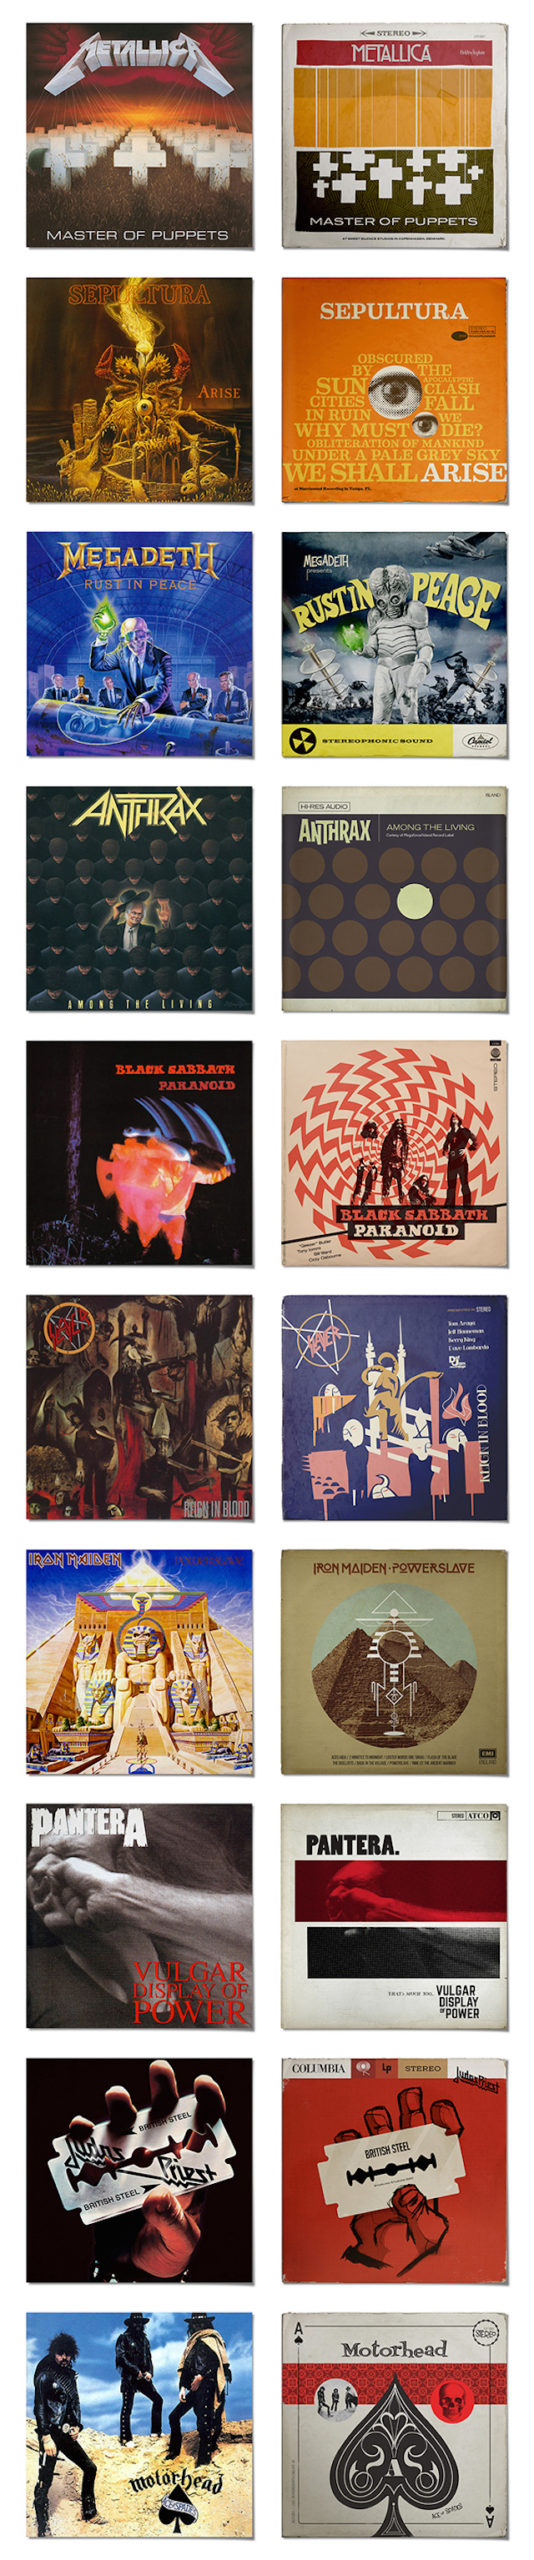 Classic Metal Albums Redesigned As 1950s Jazz Records